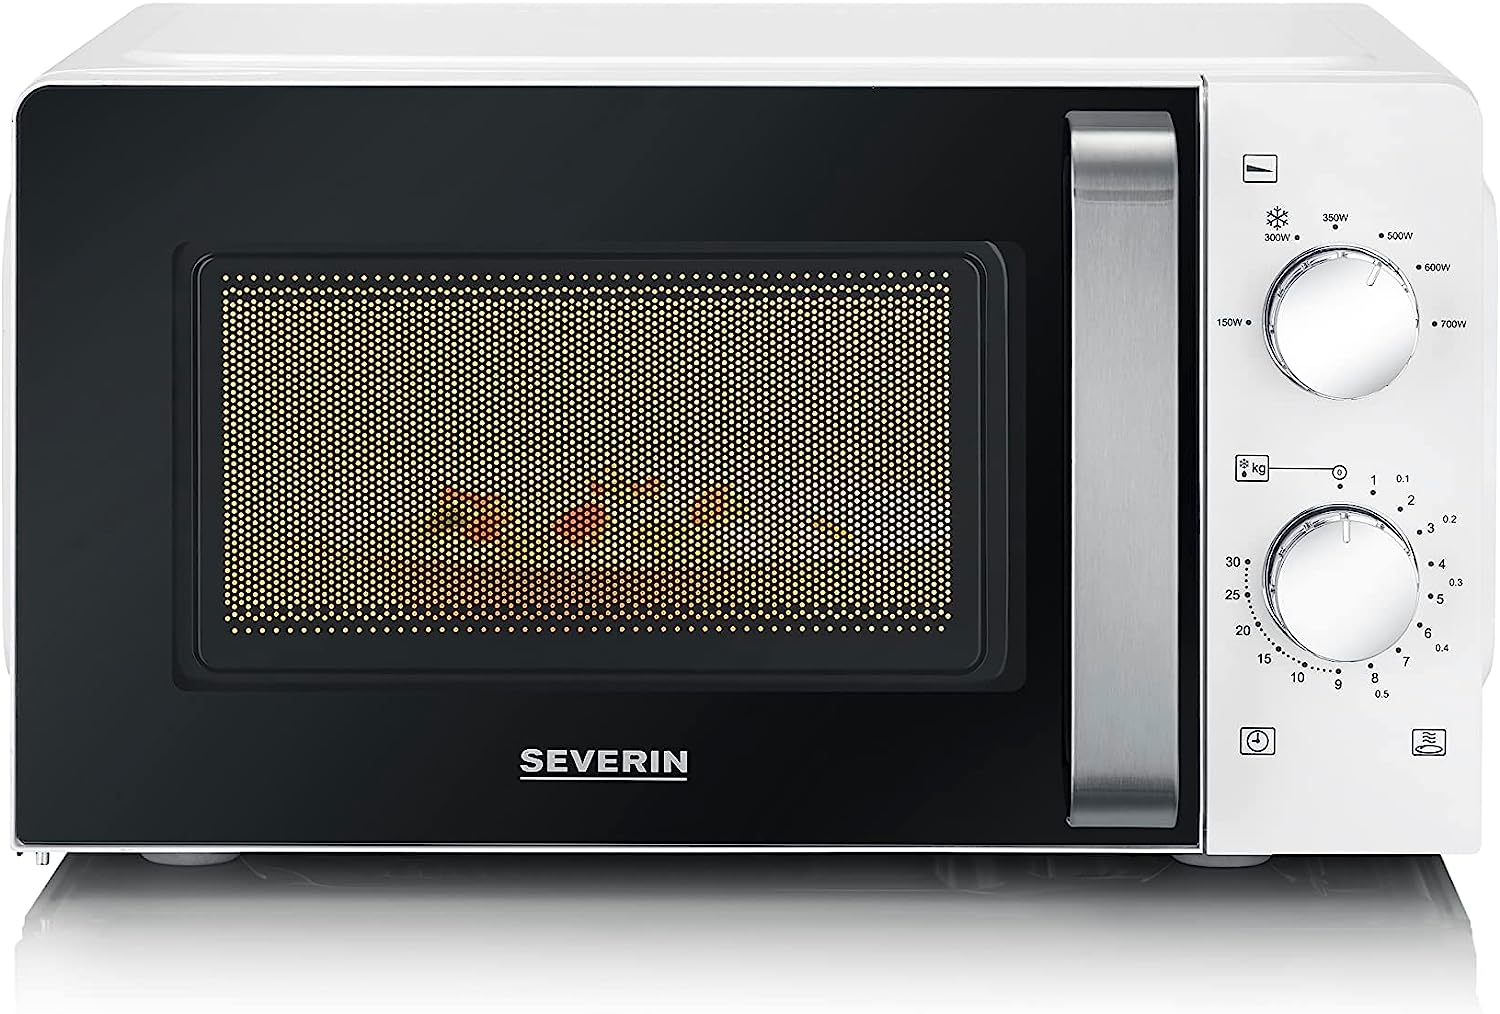 Severin Microwave Solo MW 7885 Microwave Defrosting and Heating Unit Microwave with Turntable for Even Heat Distribution White/Black